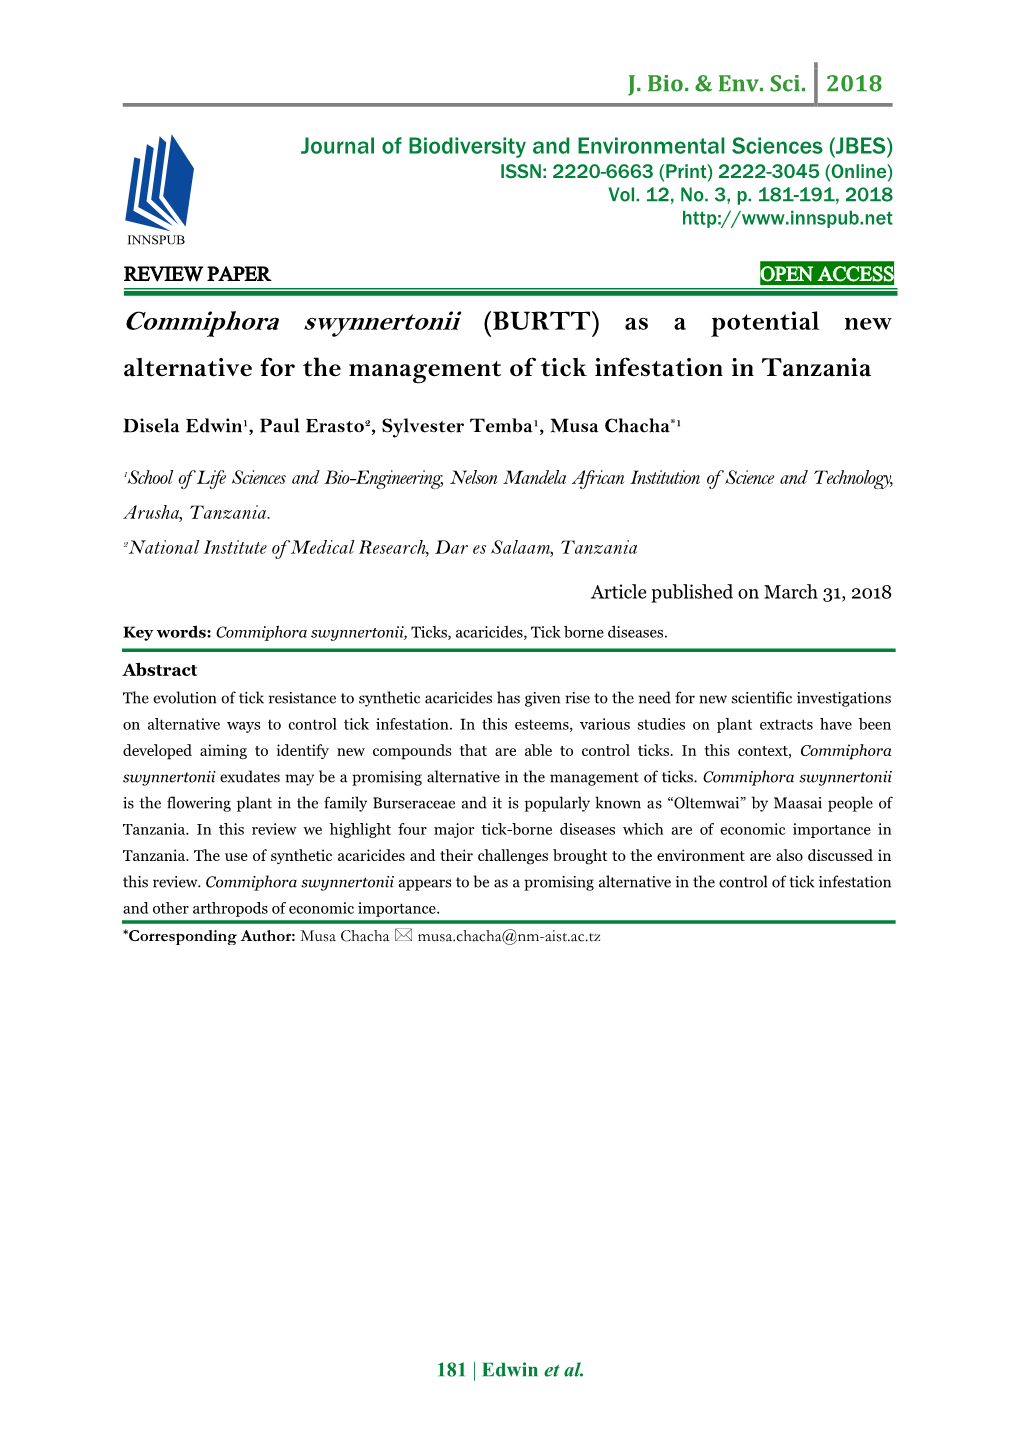 Commiphora Swynnertonii (BURTT) As a Potential New Alternative for the Management of Tick Infestation in Tanzania